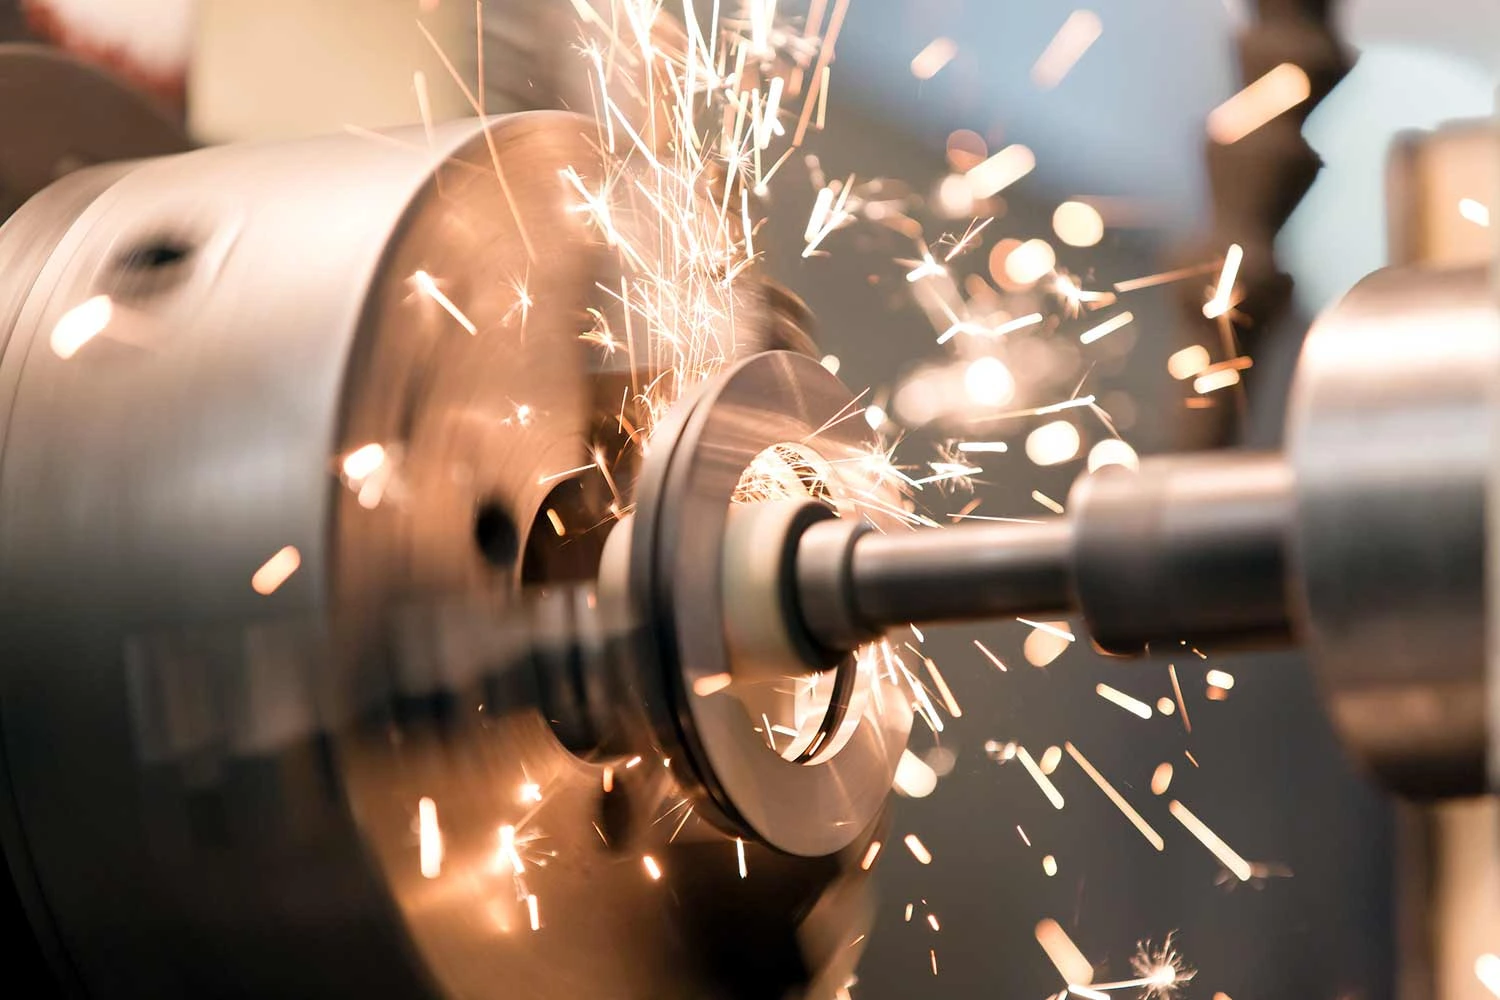 Metalworking industry: finishing metal working internal steel surface on lathe grinder machine with flying sparks